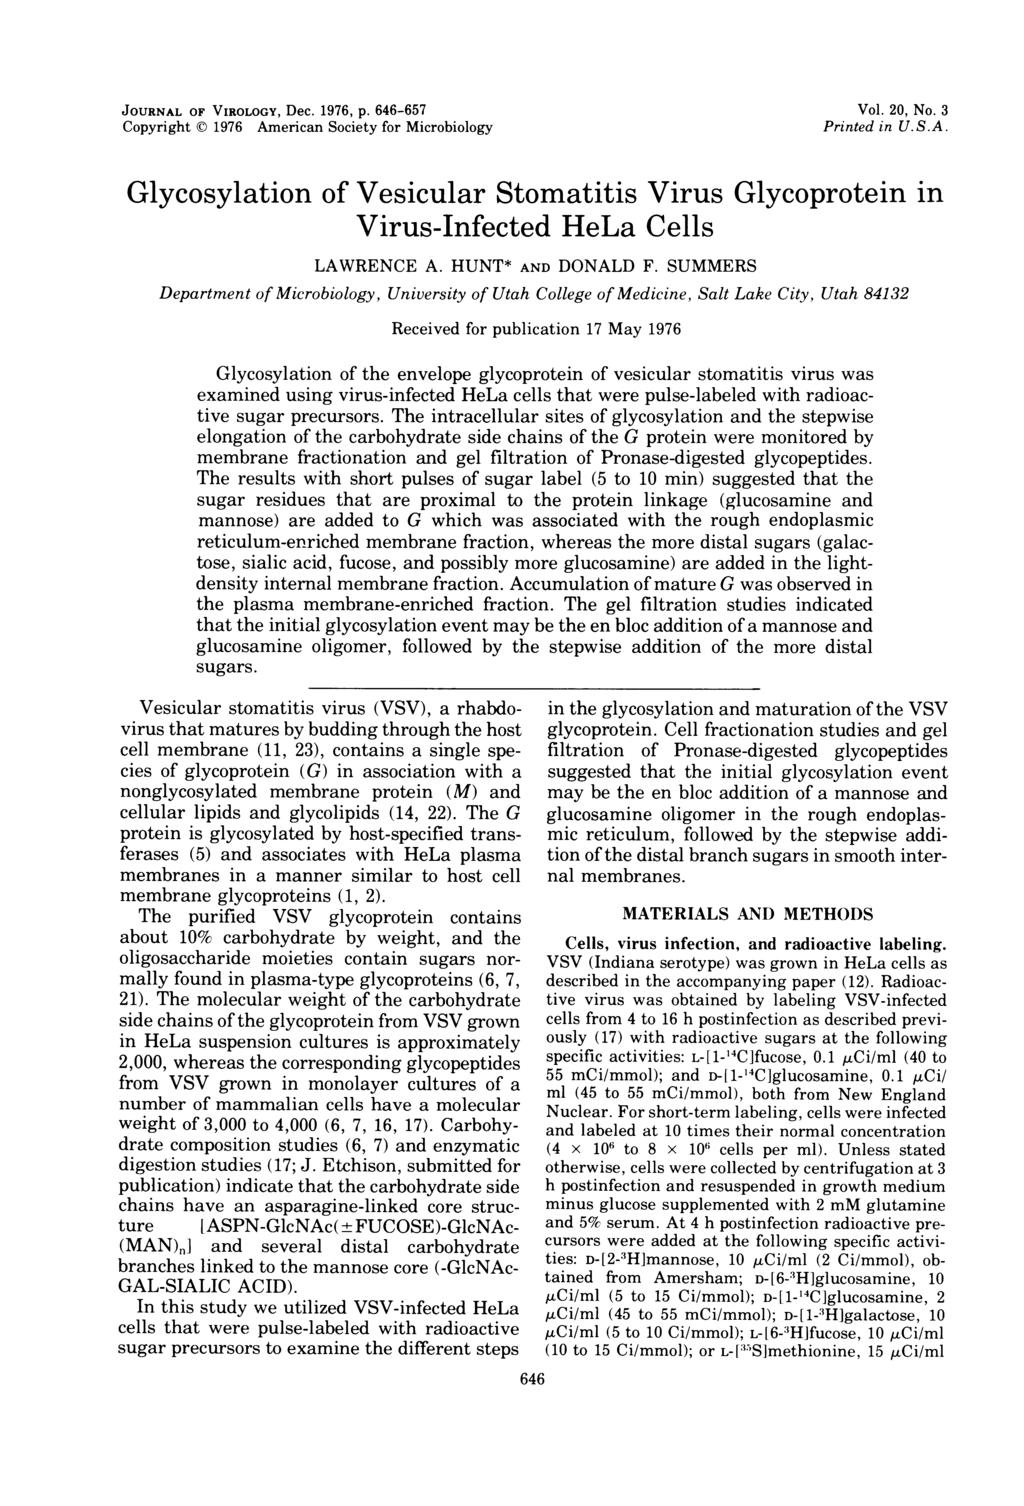 JOURNAL OF VIROLOGY, Dec. 1976, p. 646-657 Copyright C) 1976 American Society for Microbiology Vol. 20, No. 3 Printed in U.S.A. Glycosylation of Vesicular Stomatitis Virus Glycoprotein in Virus-Infected HeLa Cells LAWRENCE A.